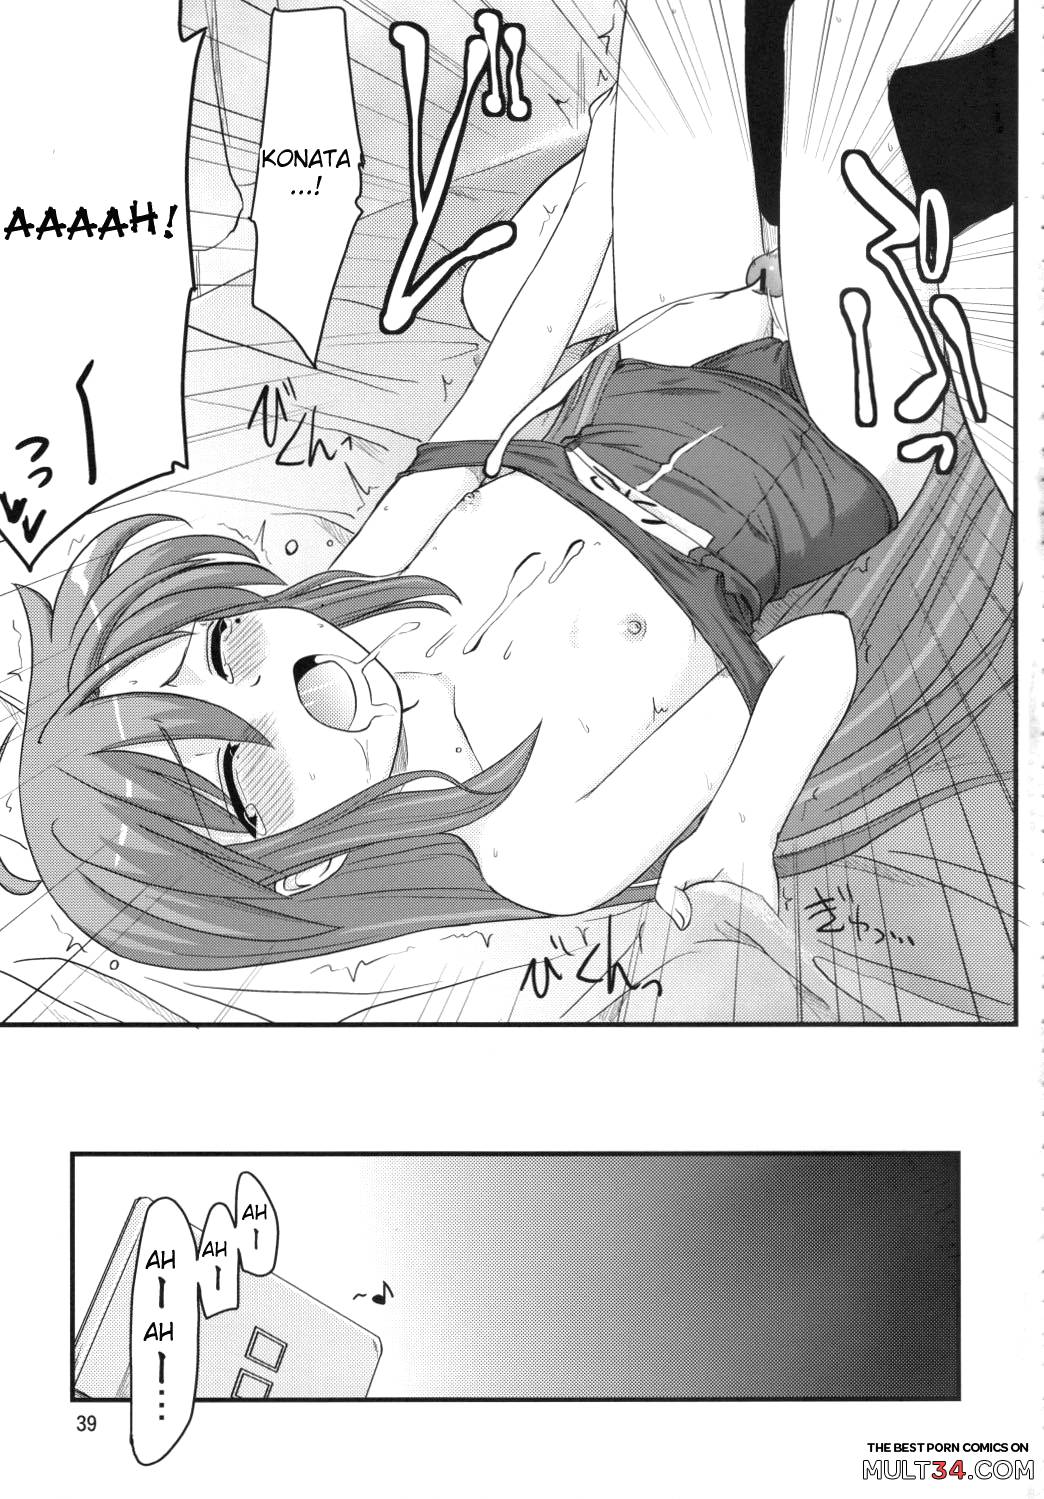 Konata and Oh-zu 4 people each and every one + 1 page 35